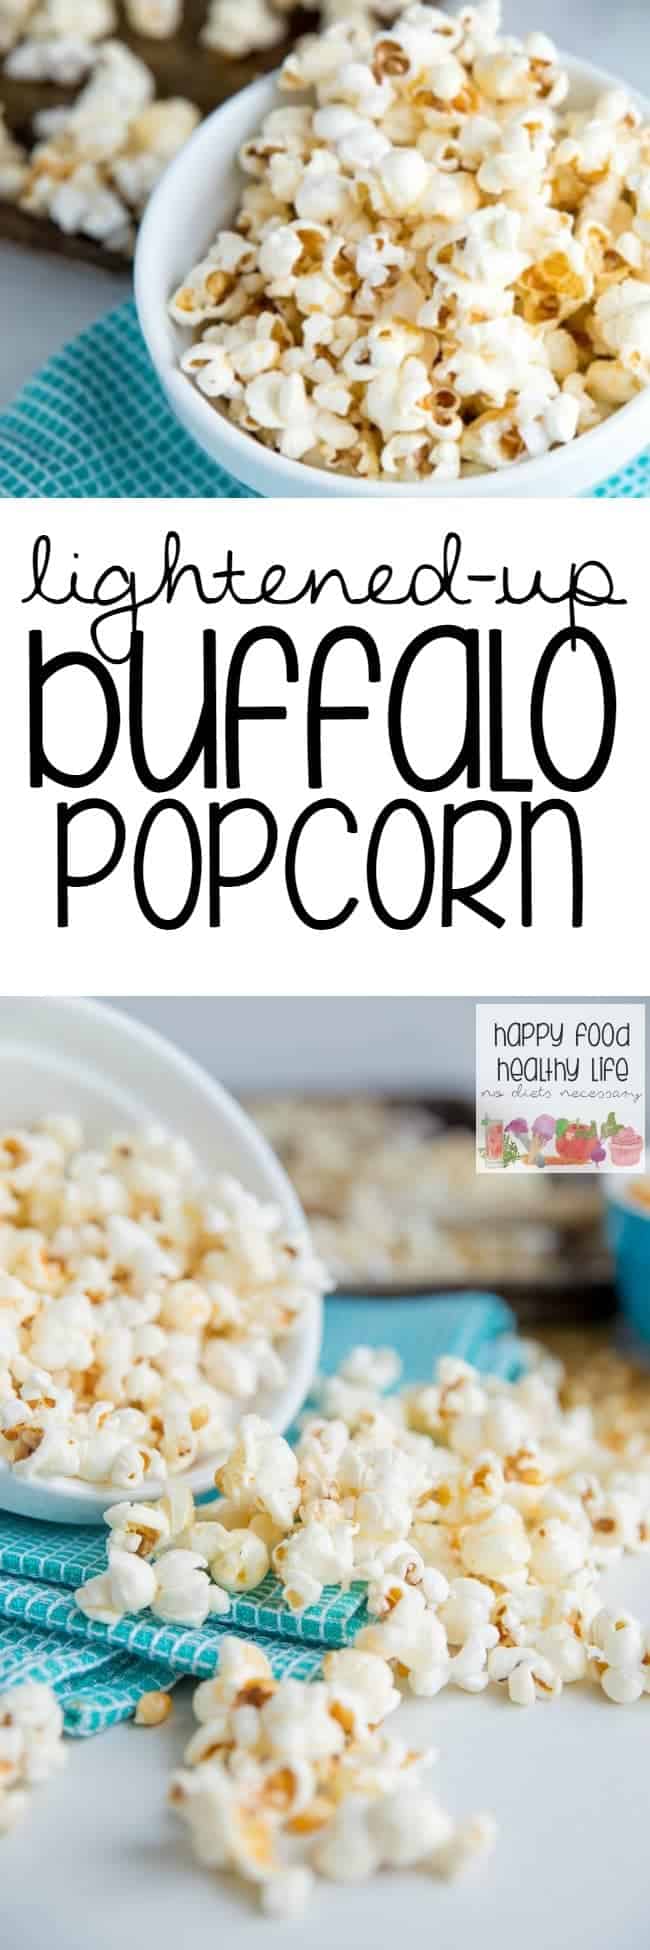 Lightened Up Buffalo Popcorn Recipes - the perfect snack with the flavors of buffalo chicken that you love! Perfect for game night, movie night, or just to watch the big game! Click through to check out of the easiest and healthiest recipes you'll ever make.